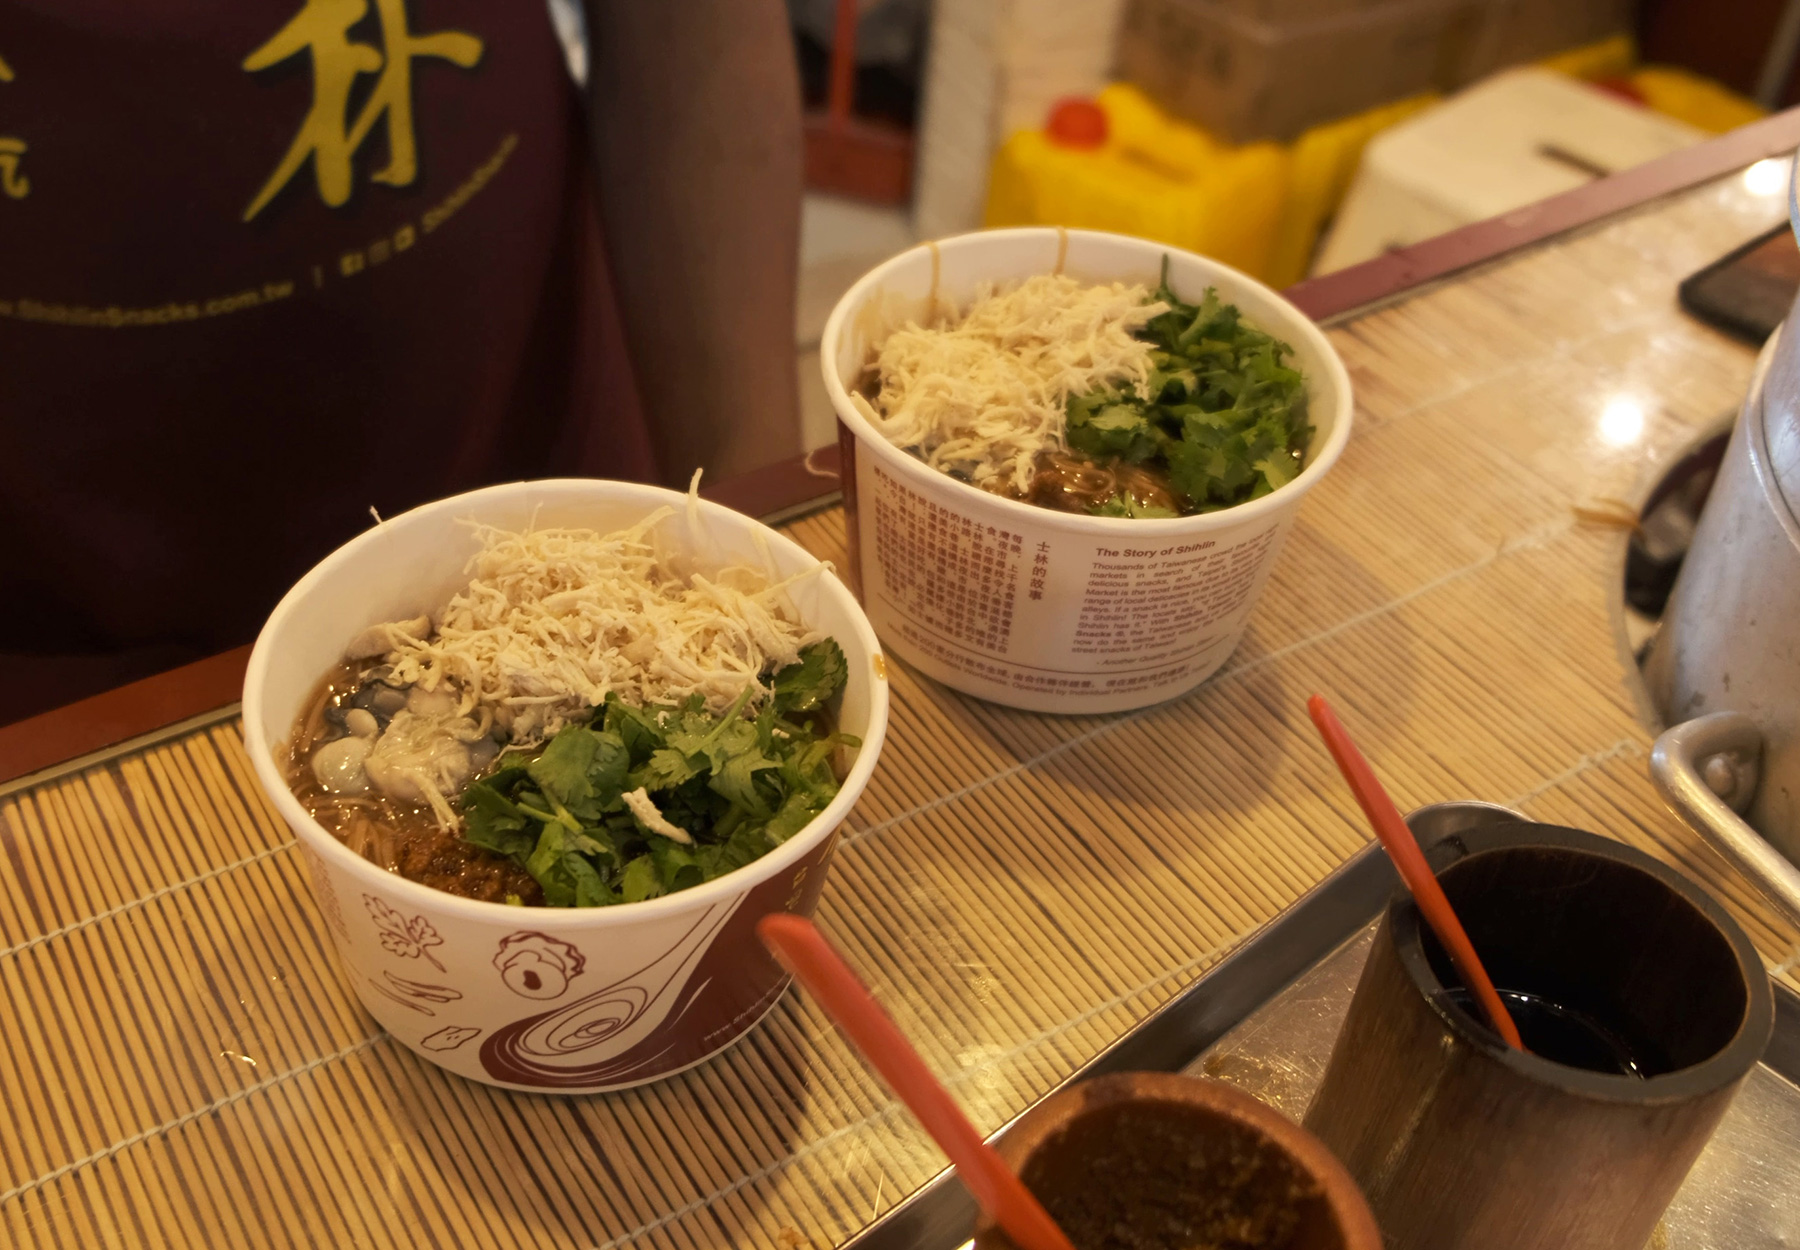 One bowl of Handmade Oyster Mee Sua is not enough – can we have two please!